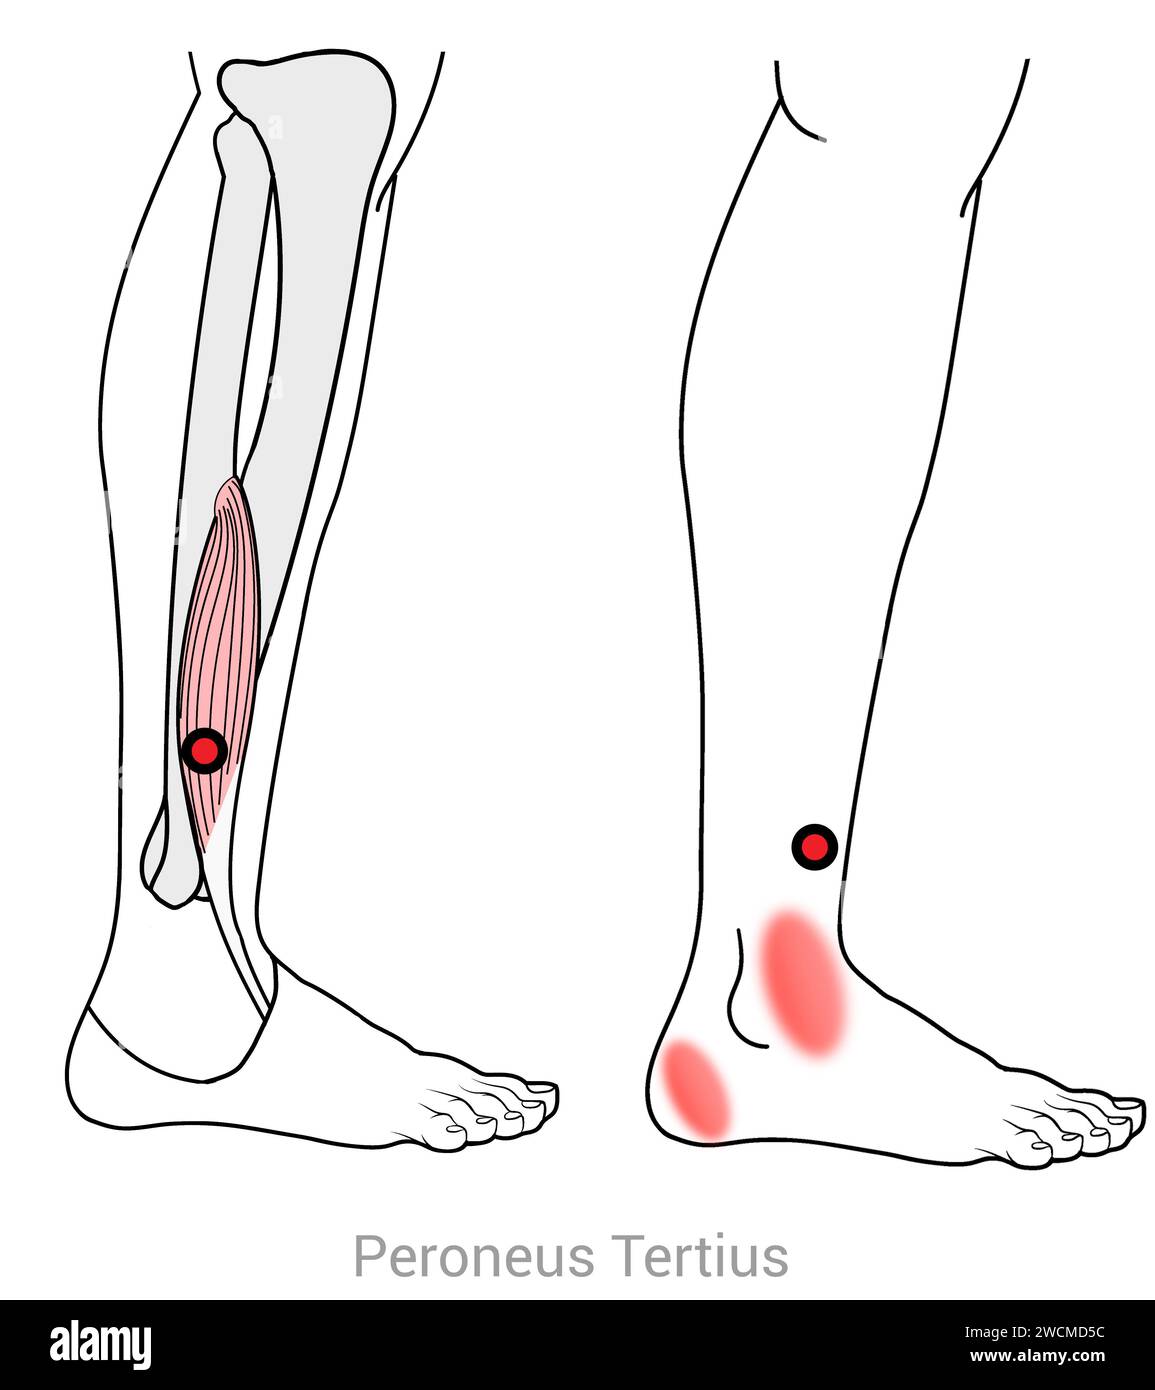 Peroneus Tertius: Myofascial trigger points and associated pain locations Stock Photo